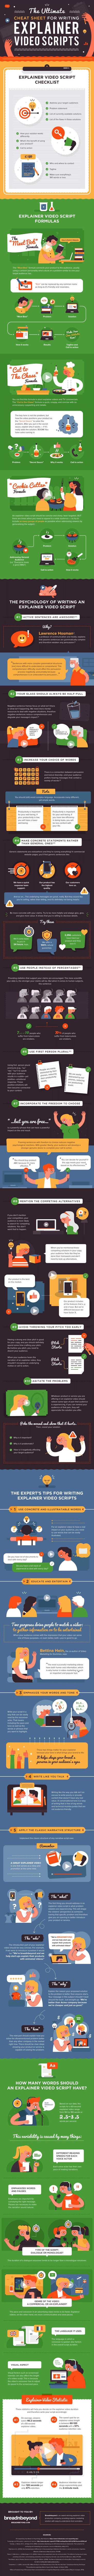 Infographic: The Ultimate Cheat Sheet for an Explainer Video Script